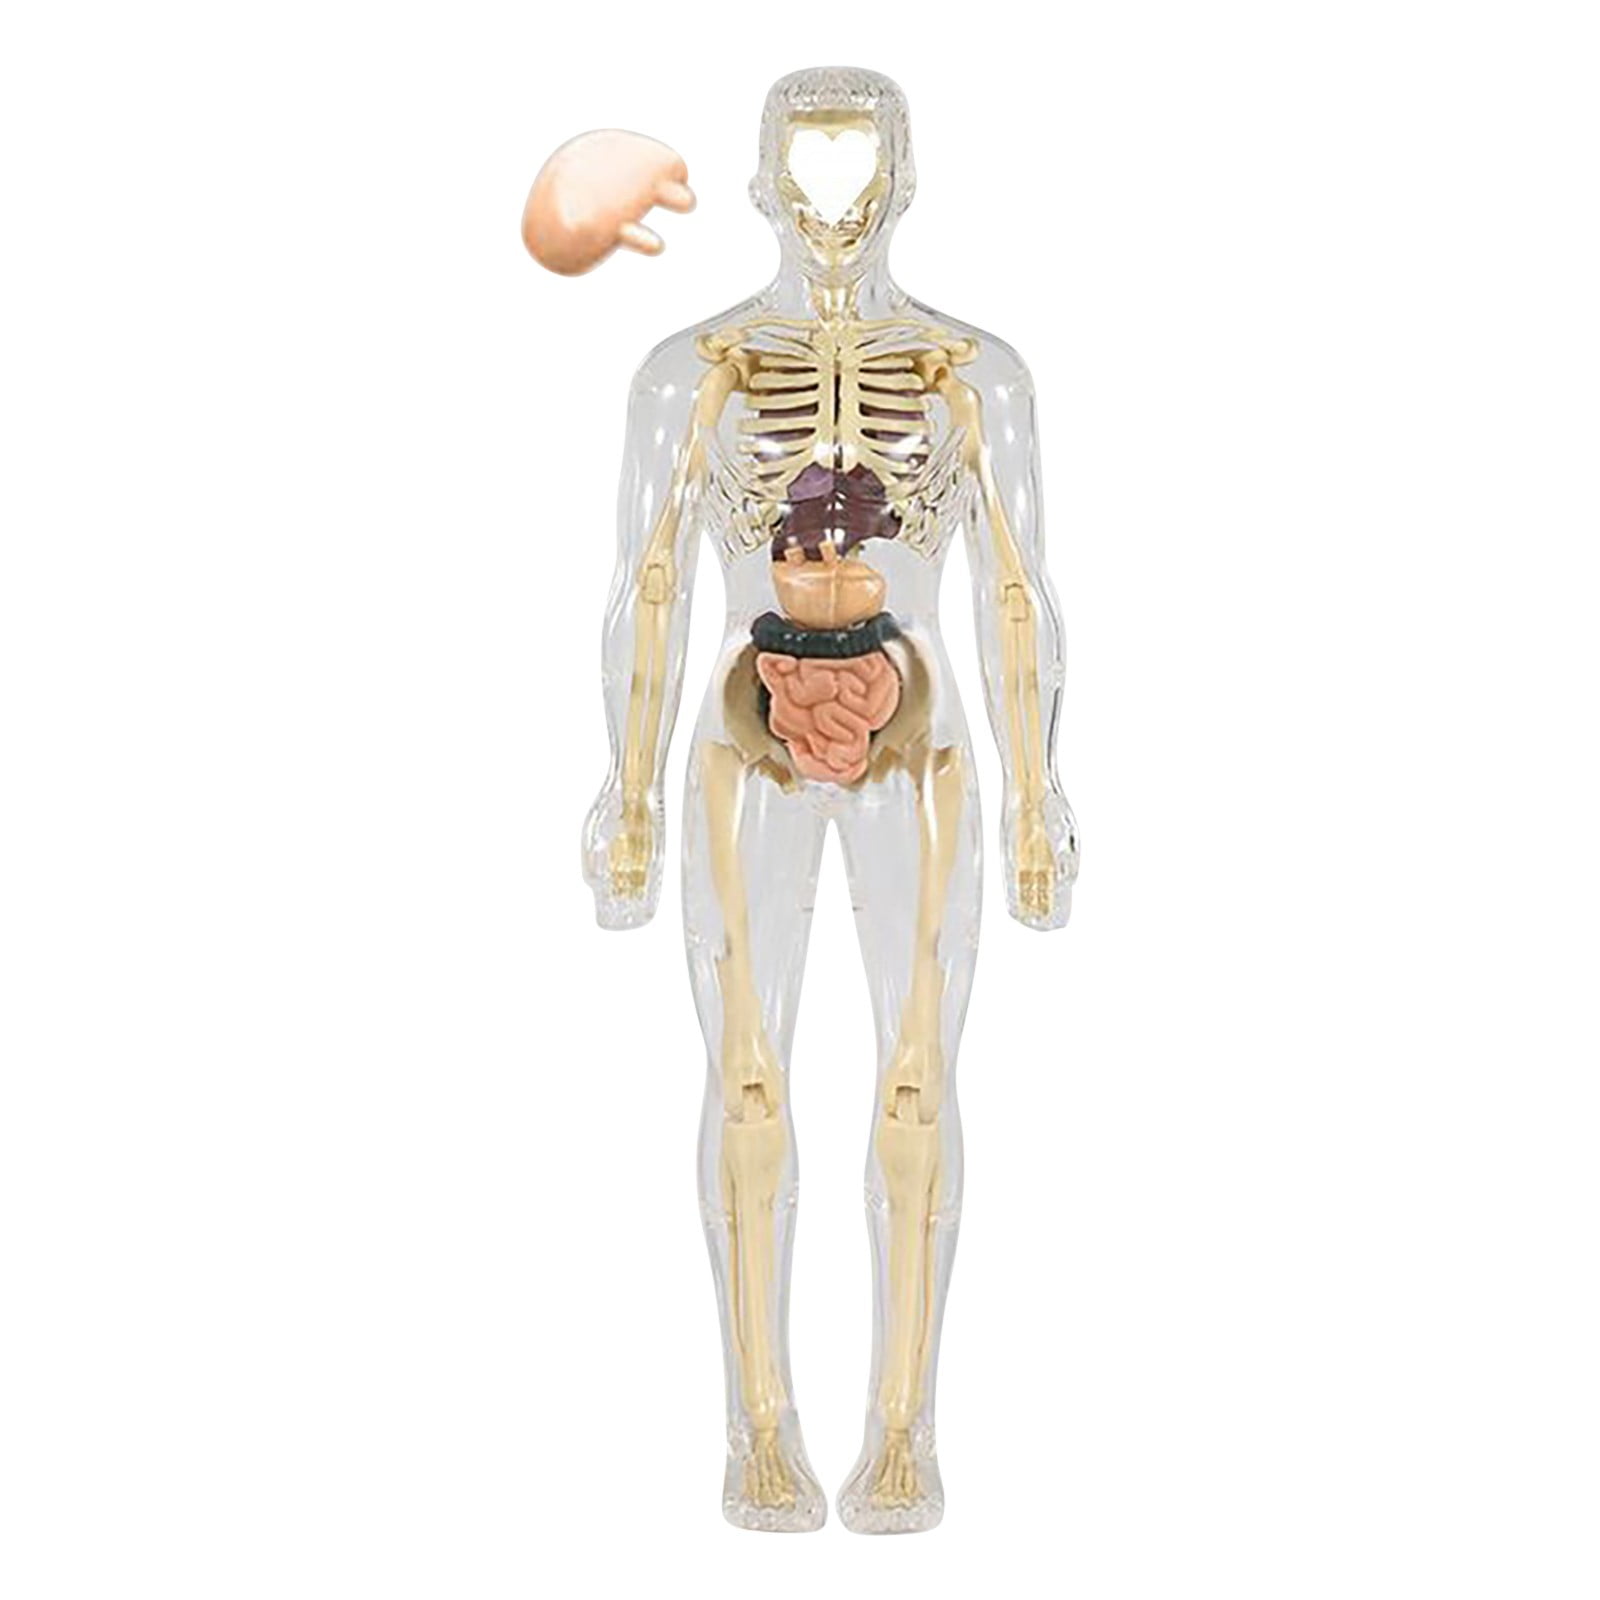 Weloille Toys Interactive Human Body Fully Poseable Anatomy Figure